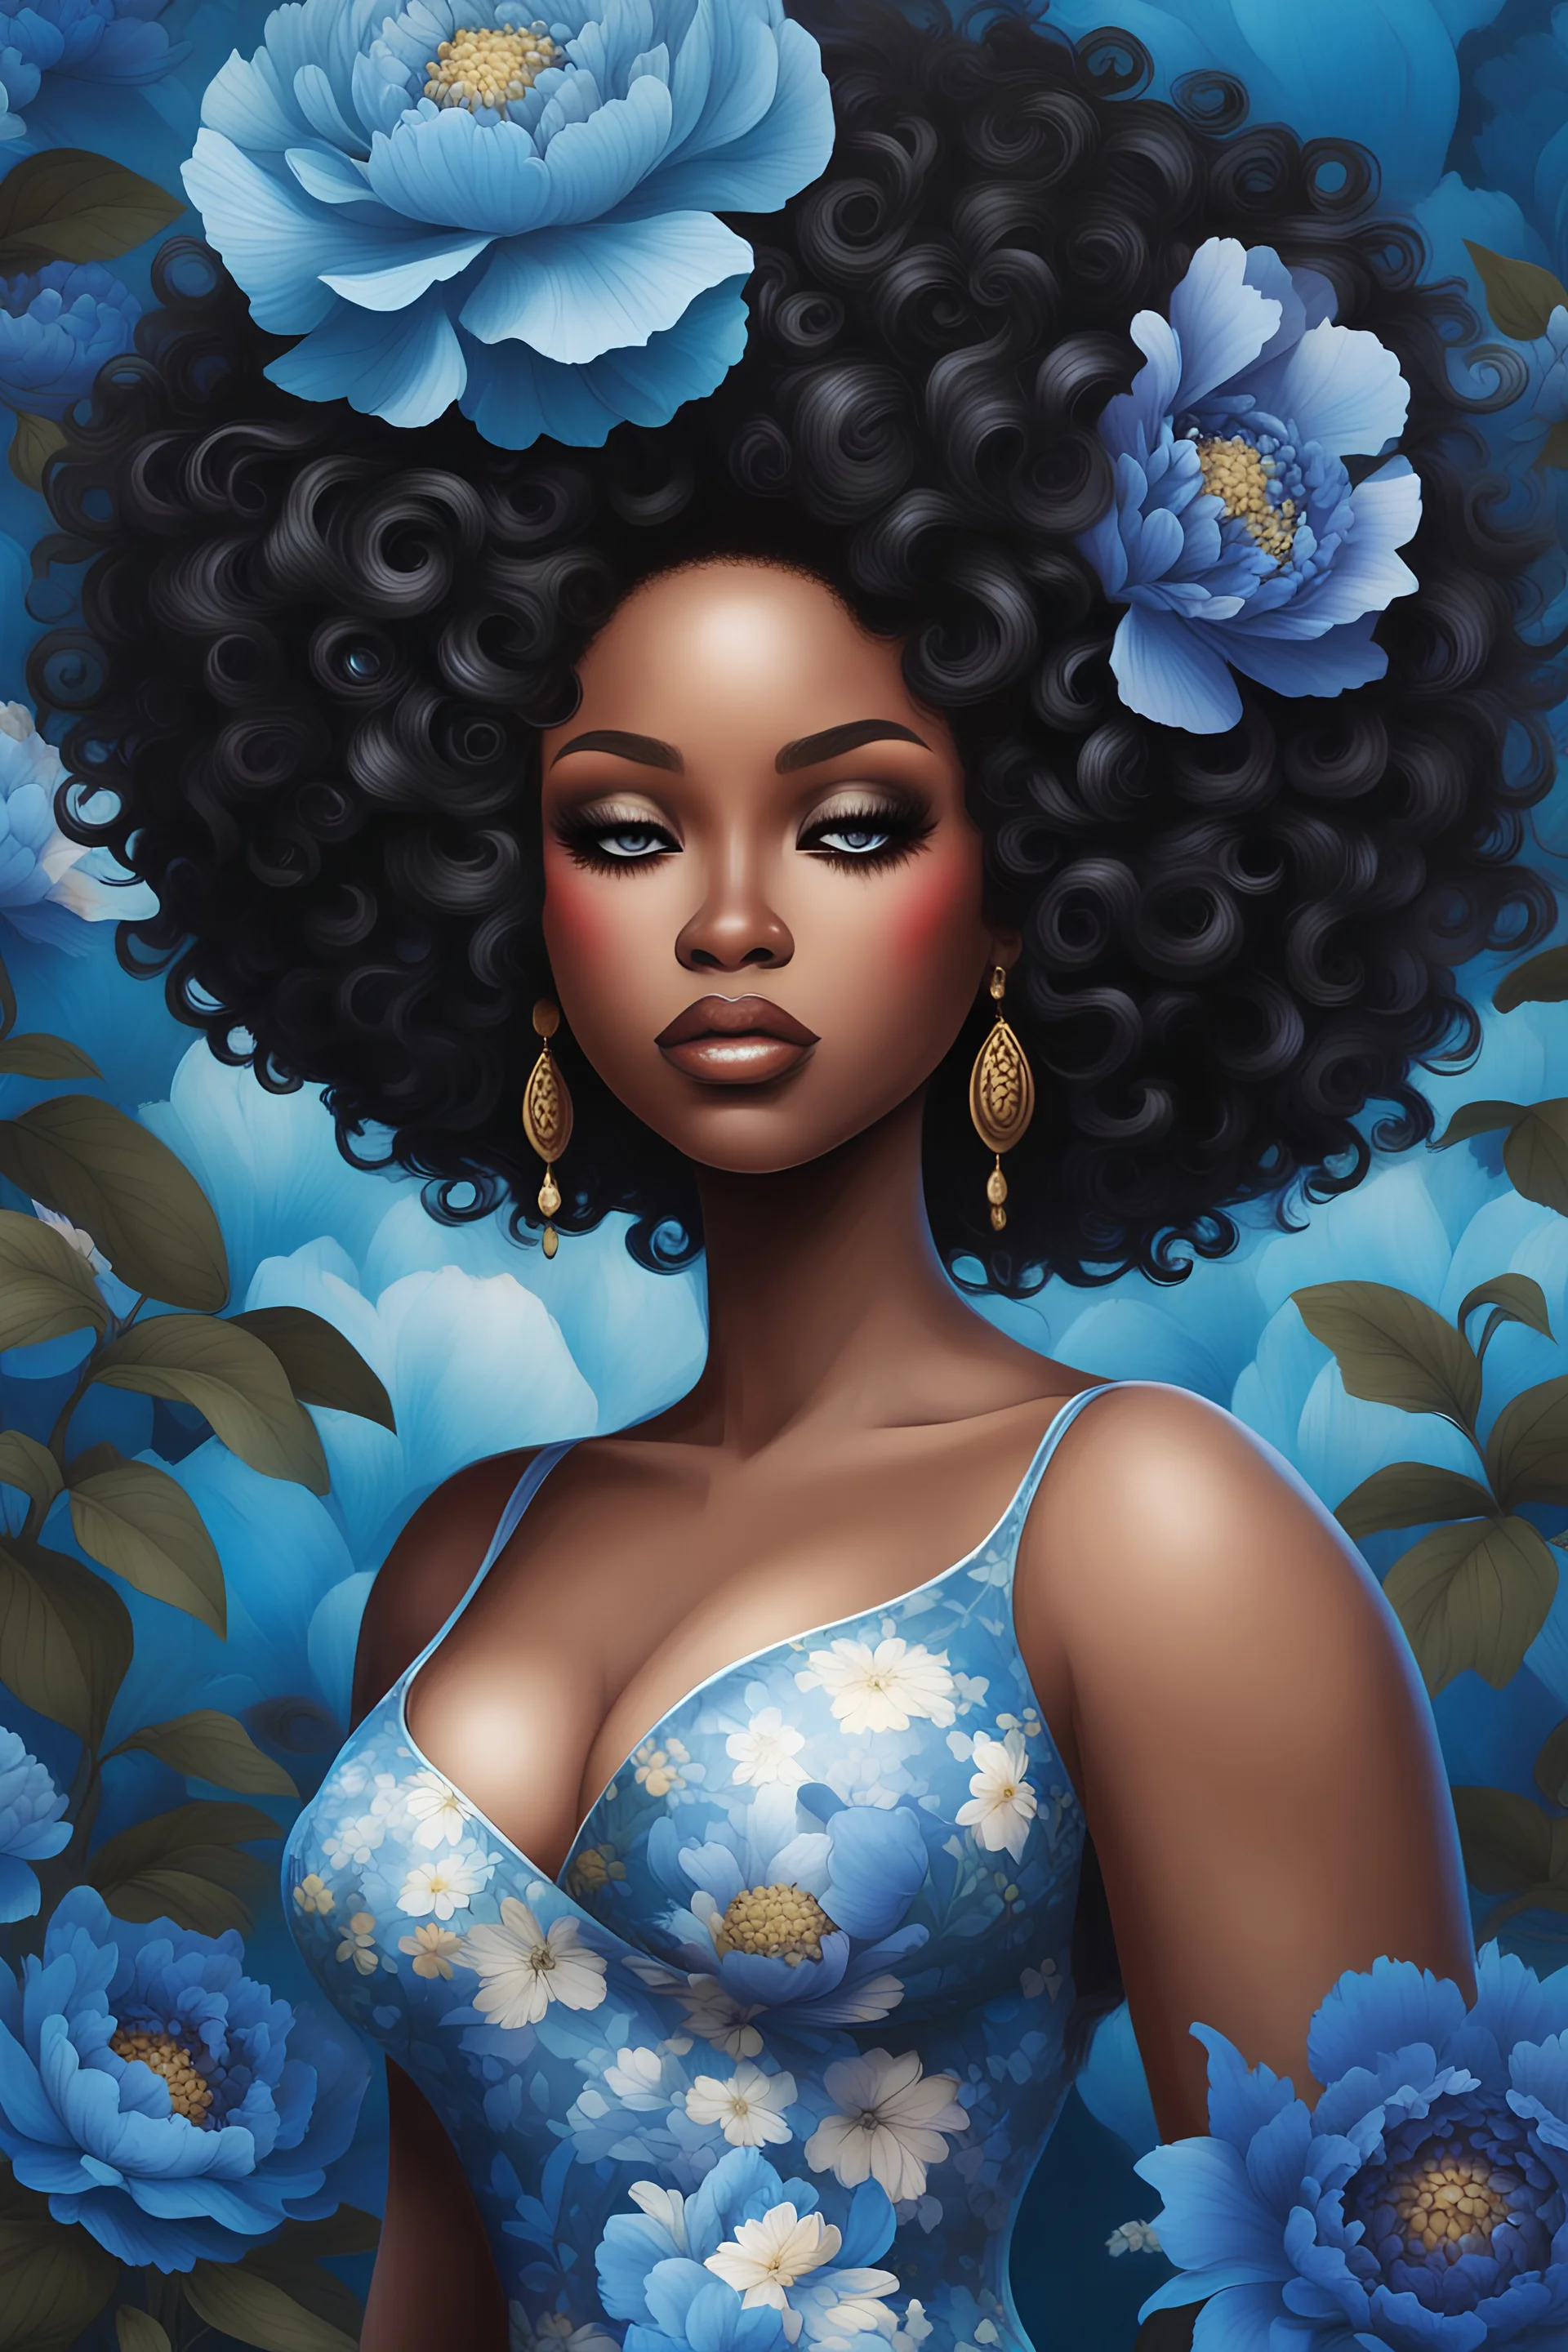 A whimsical art style of a curvy black female looking down with prominent makeup and lush lashes. She has a highly detailed long thick black tight curly afro. The background is filled with lush large blue and black peony flowers